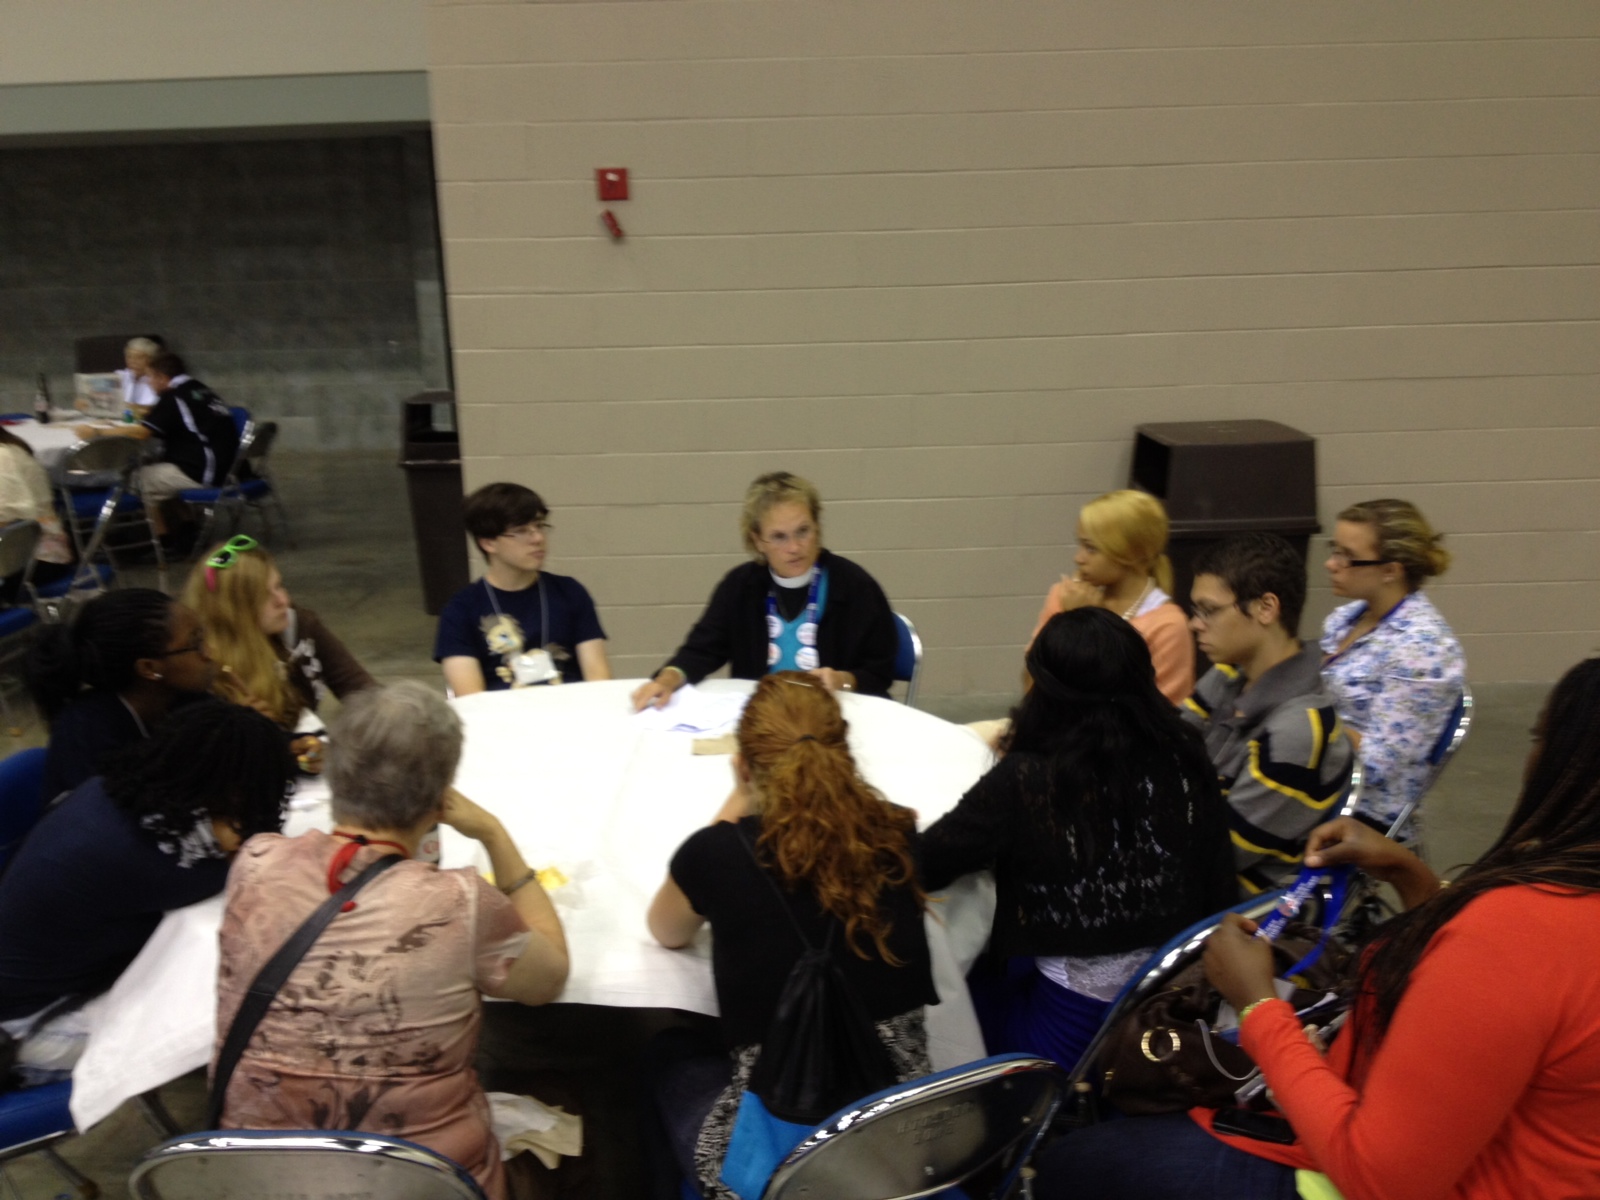 Chaplain Diana Wilcox talking with the youth attendees about what they witnessed in the House of Bishops